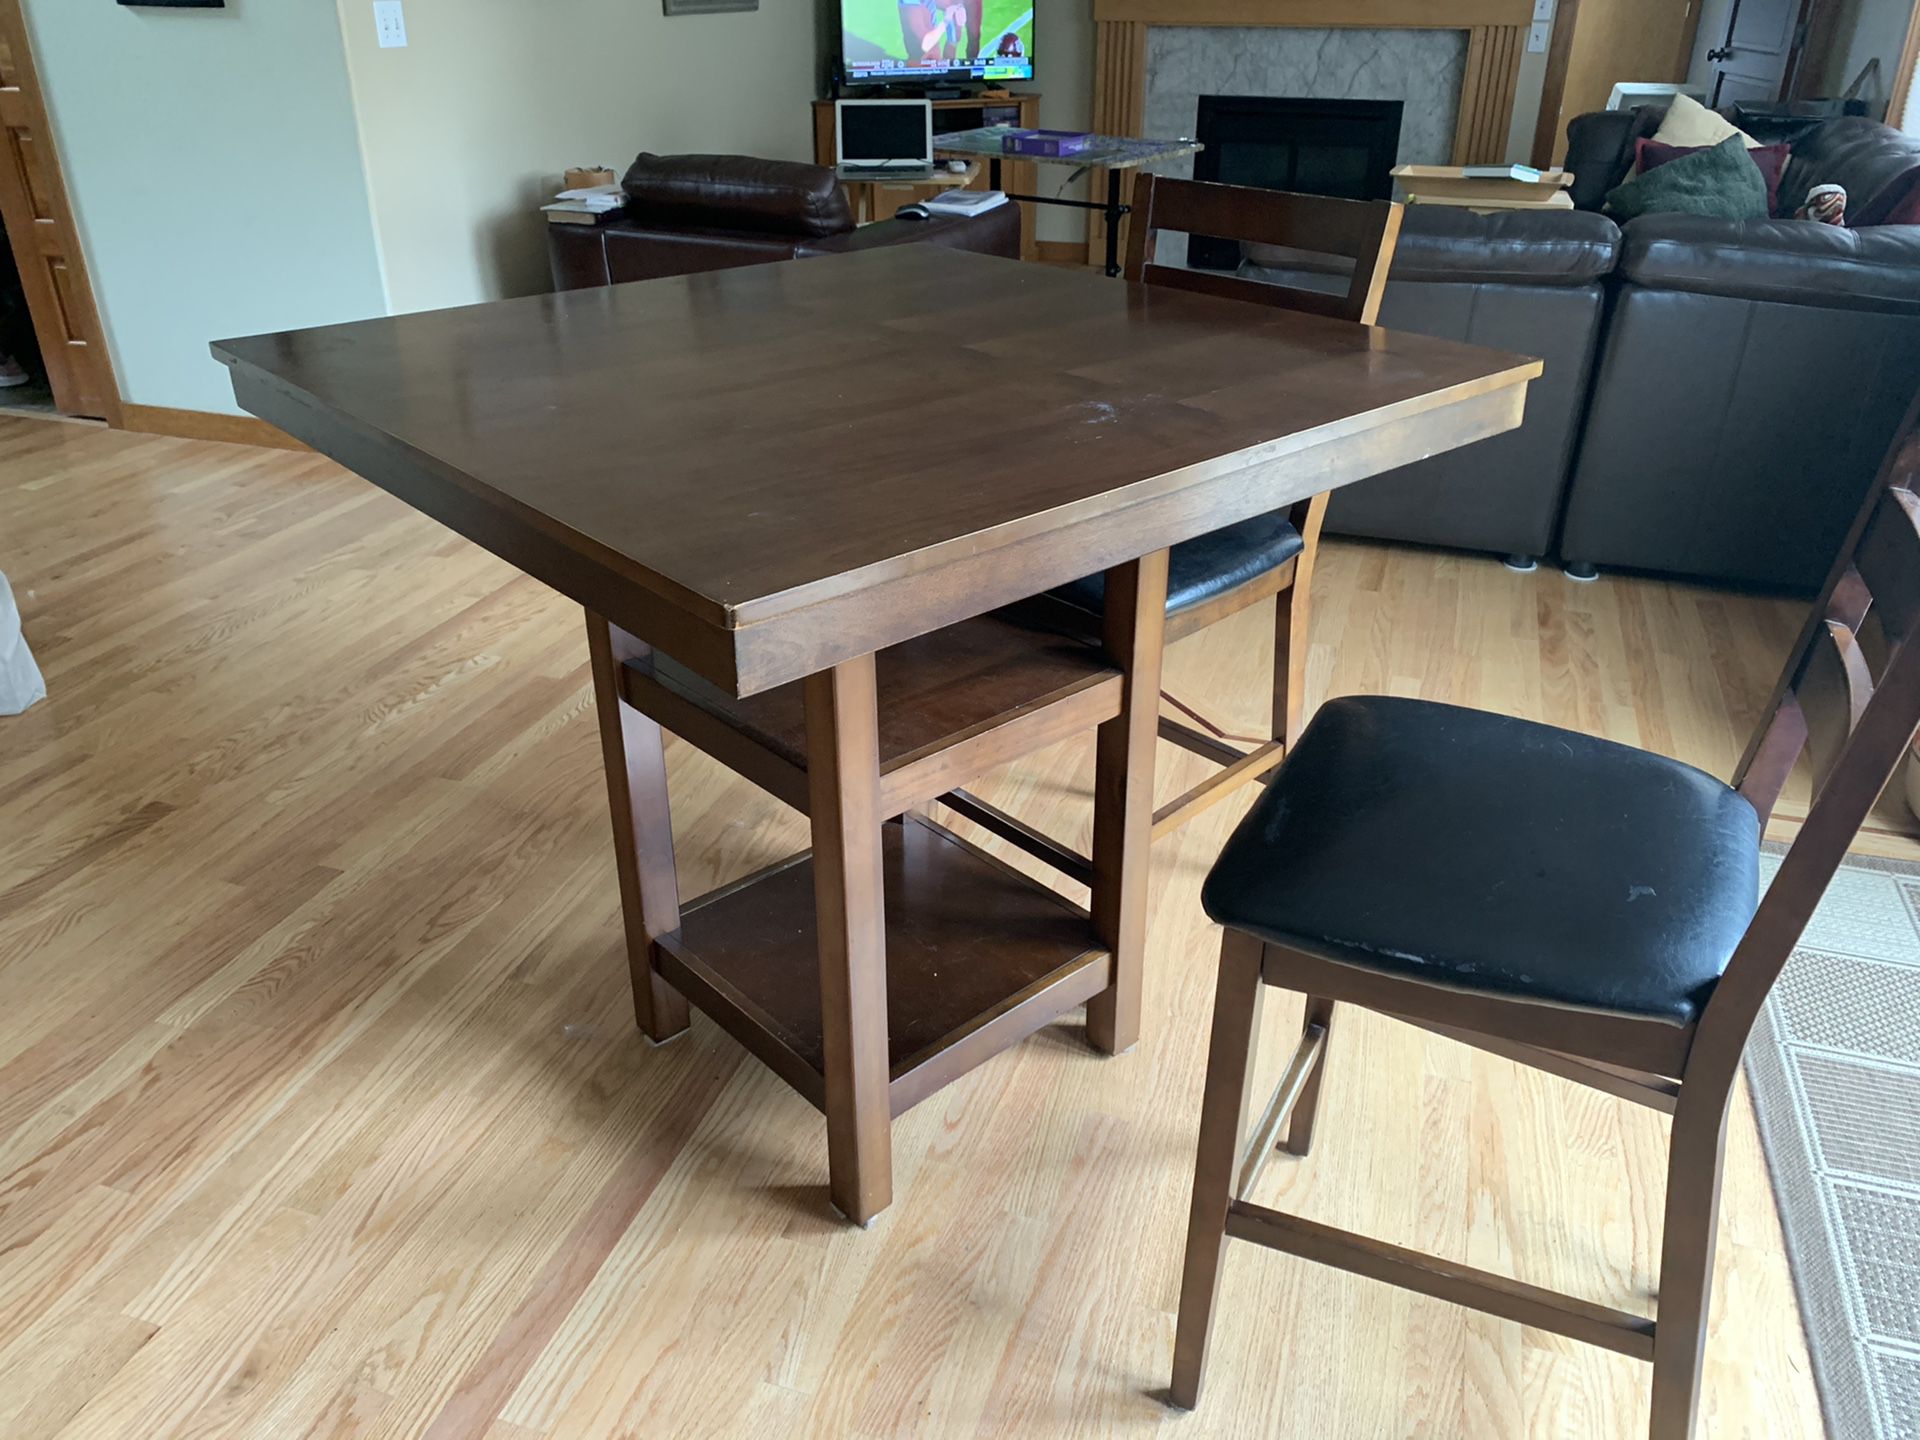 Kitchen table set. Gathering table and 4 chairs. Table top could use a refinish.